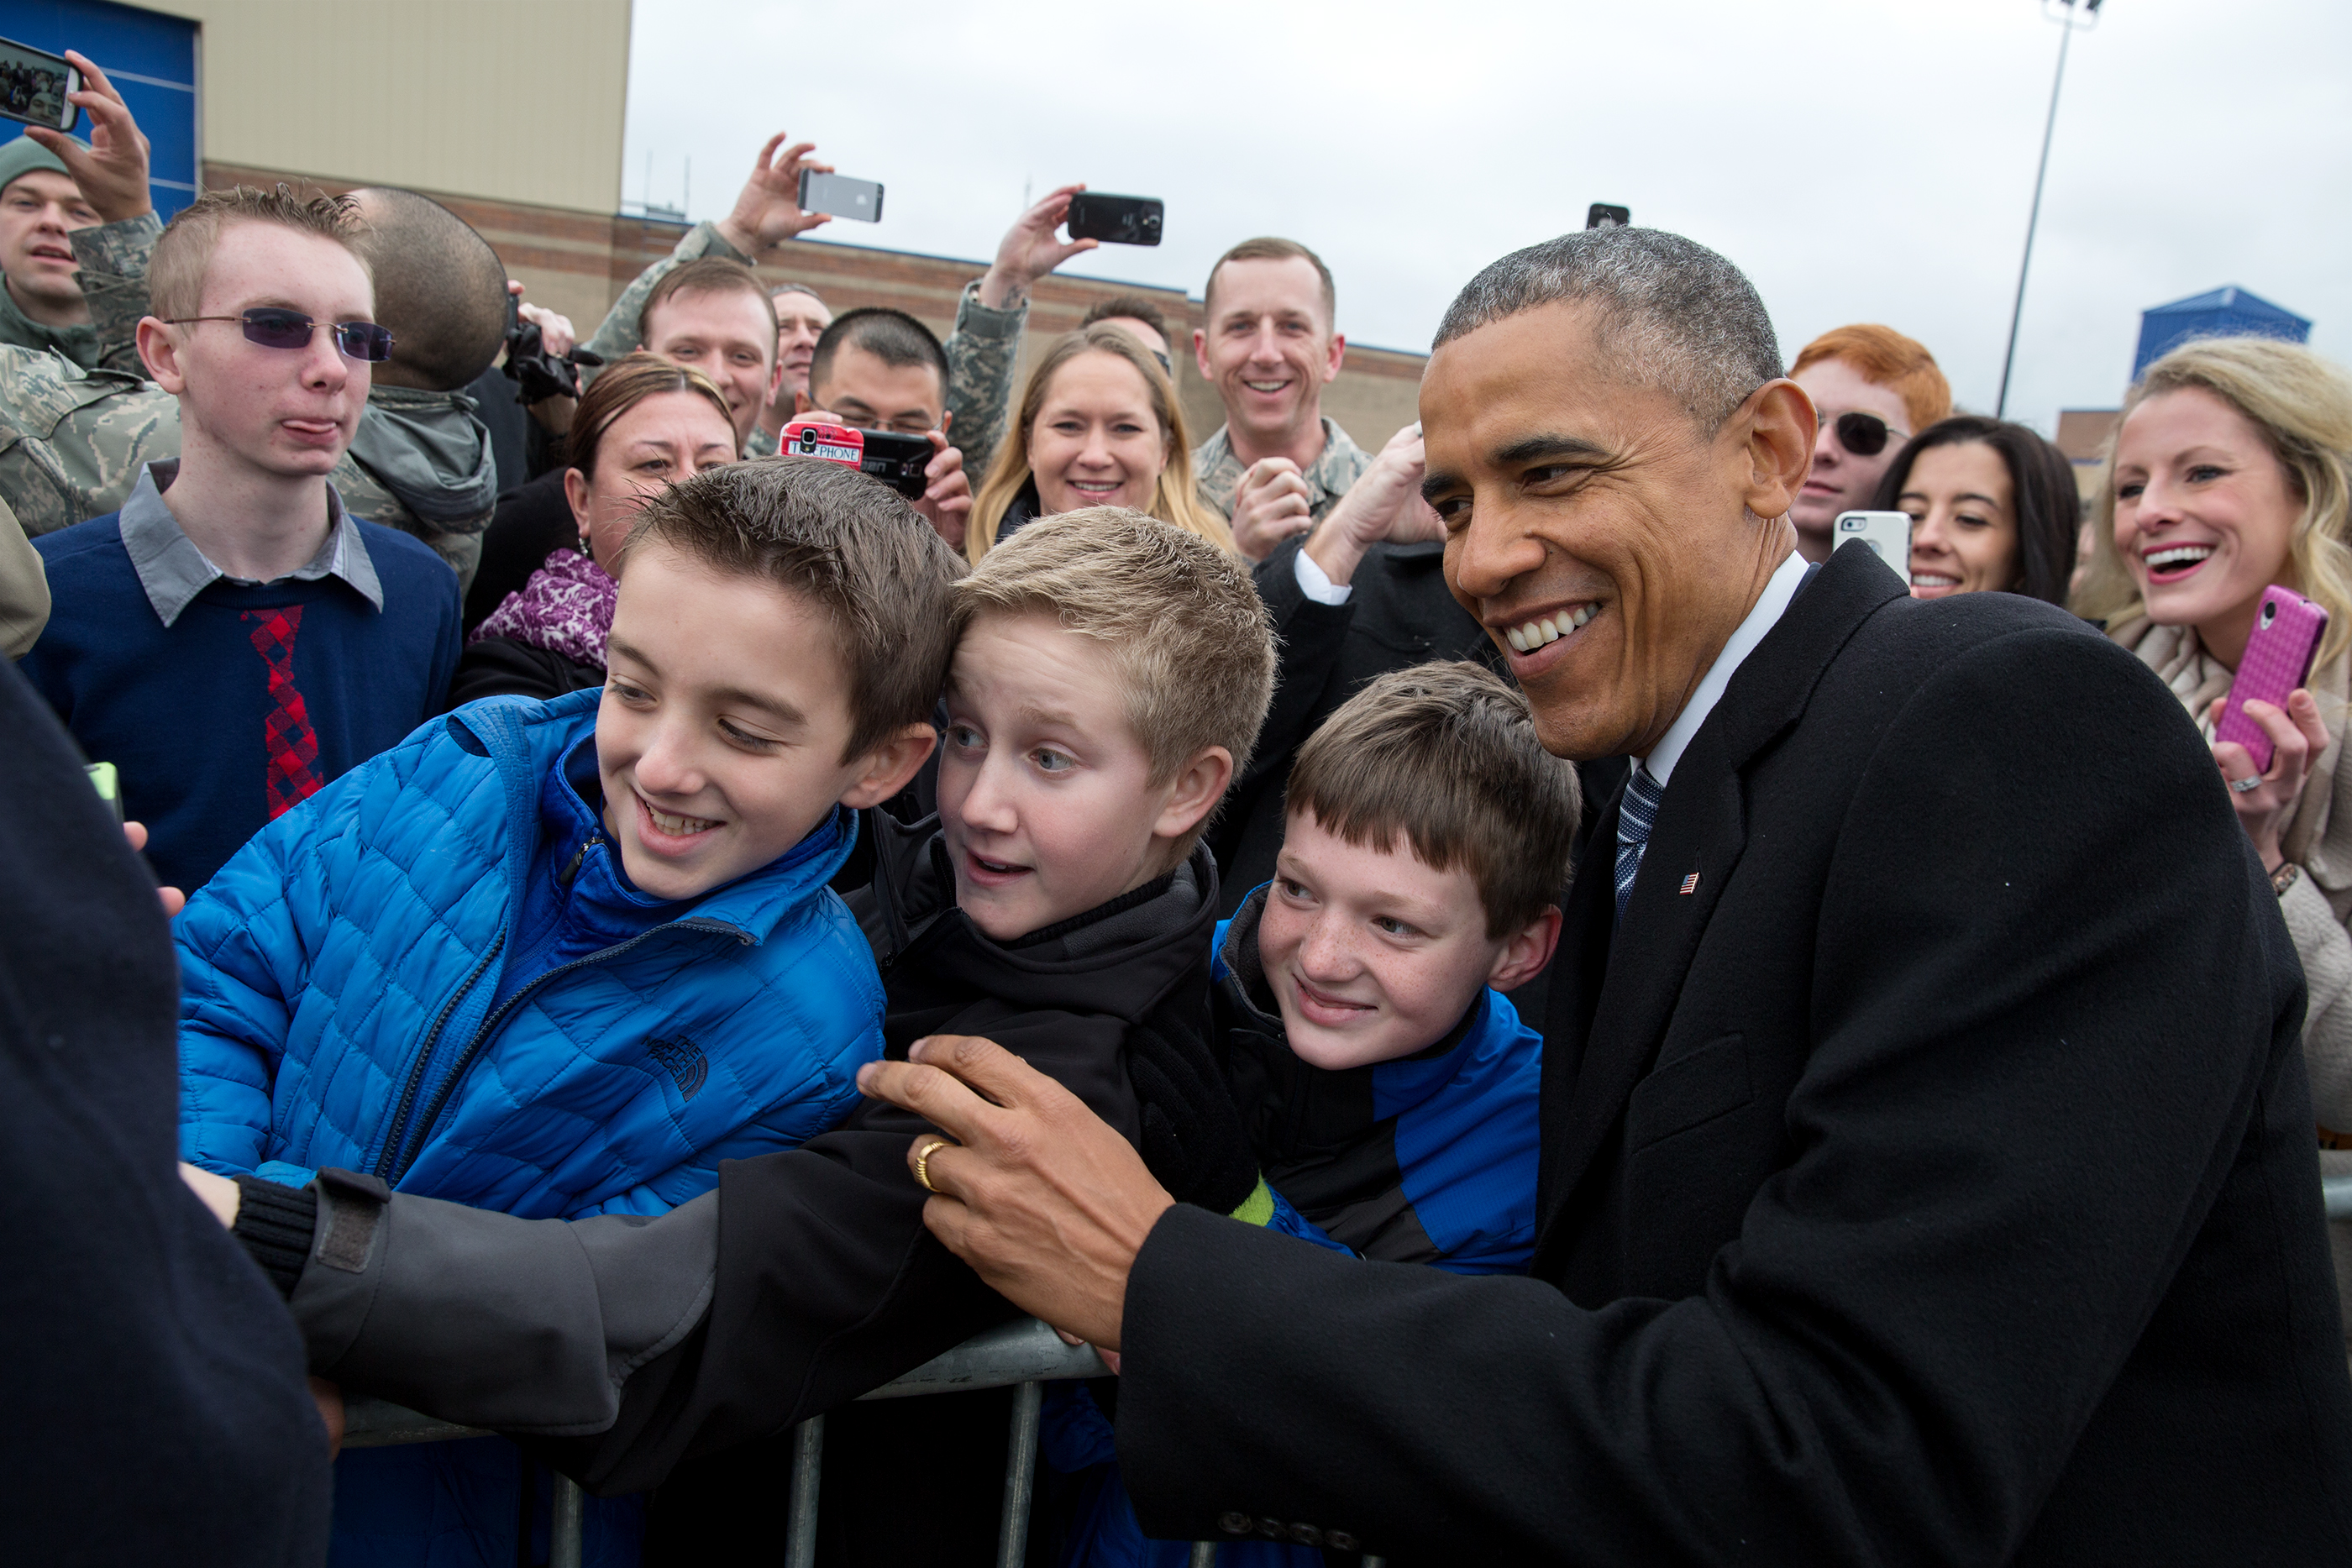 Idaho, Jan. 21, 2015. Posing for a photo with kids at Boise Airport. (Official White House Photo by Pete Souza)